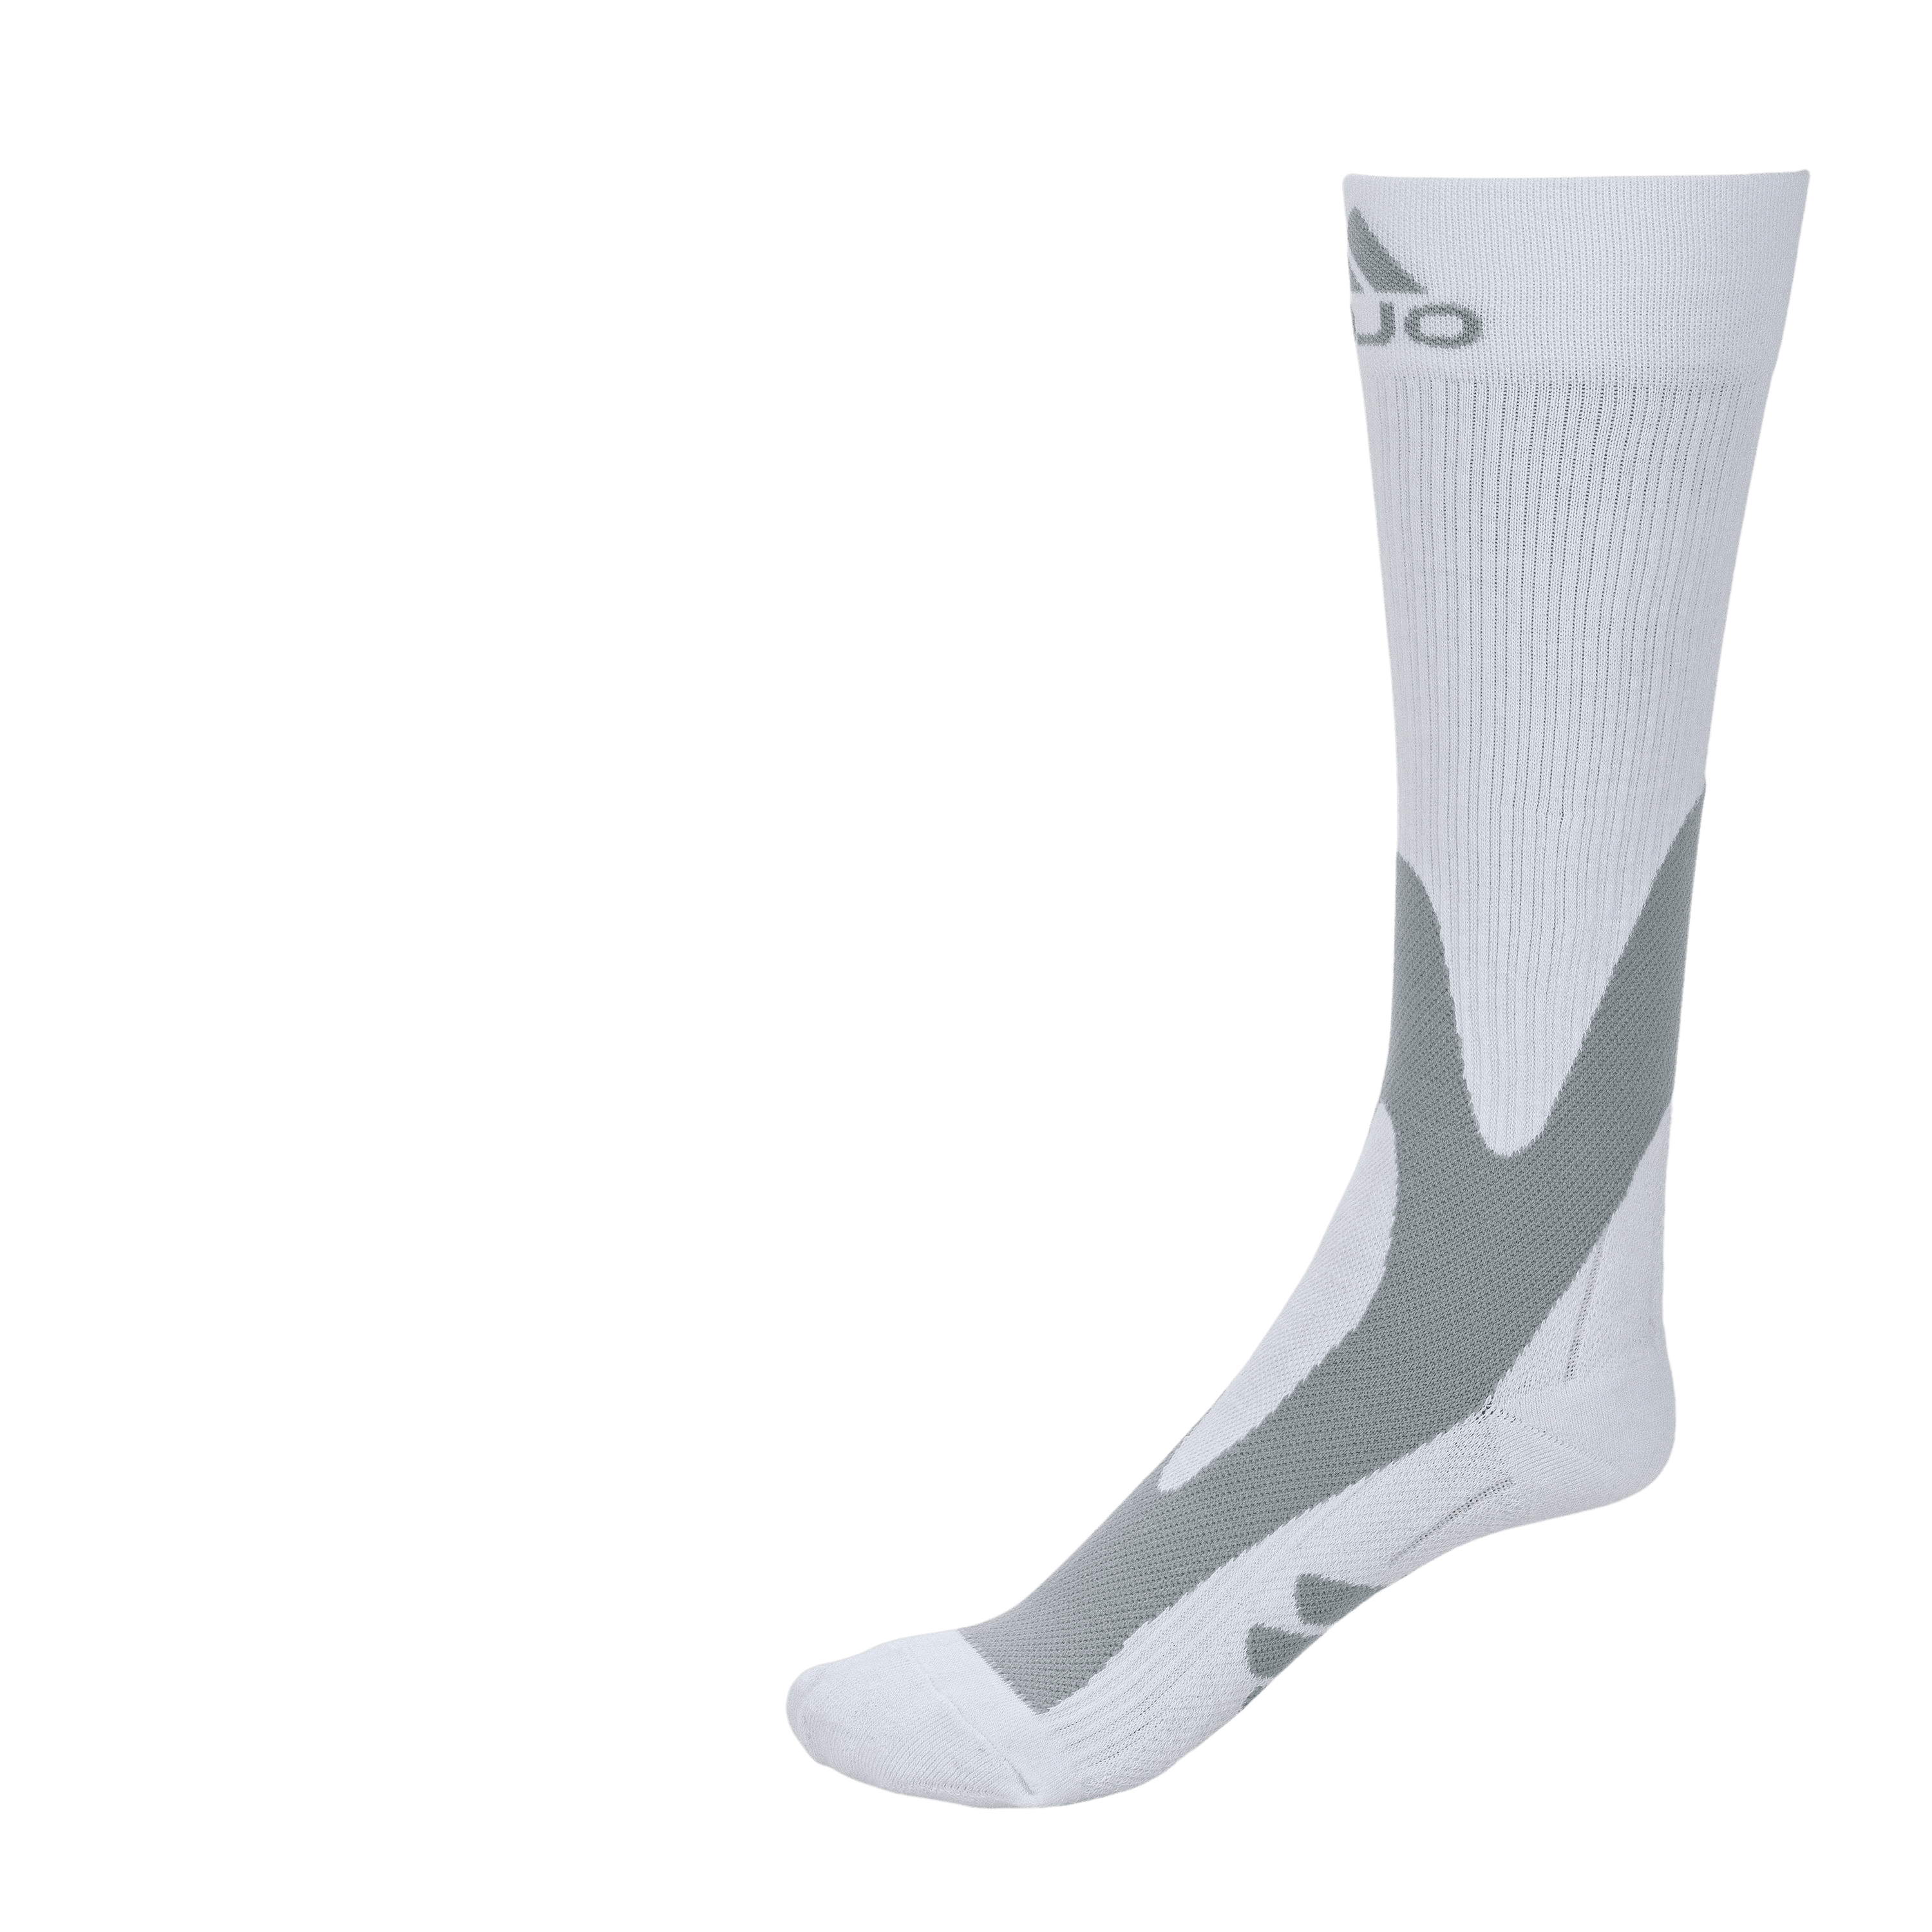 Plus Size Compression Stockings for Women and Men 20-30mmHg - Grey,  2X-Large 